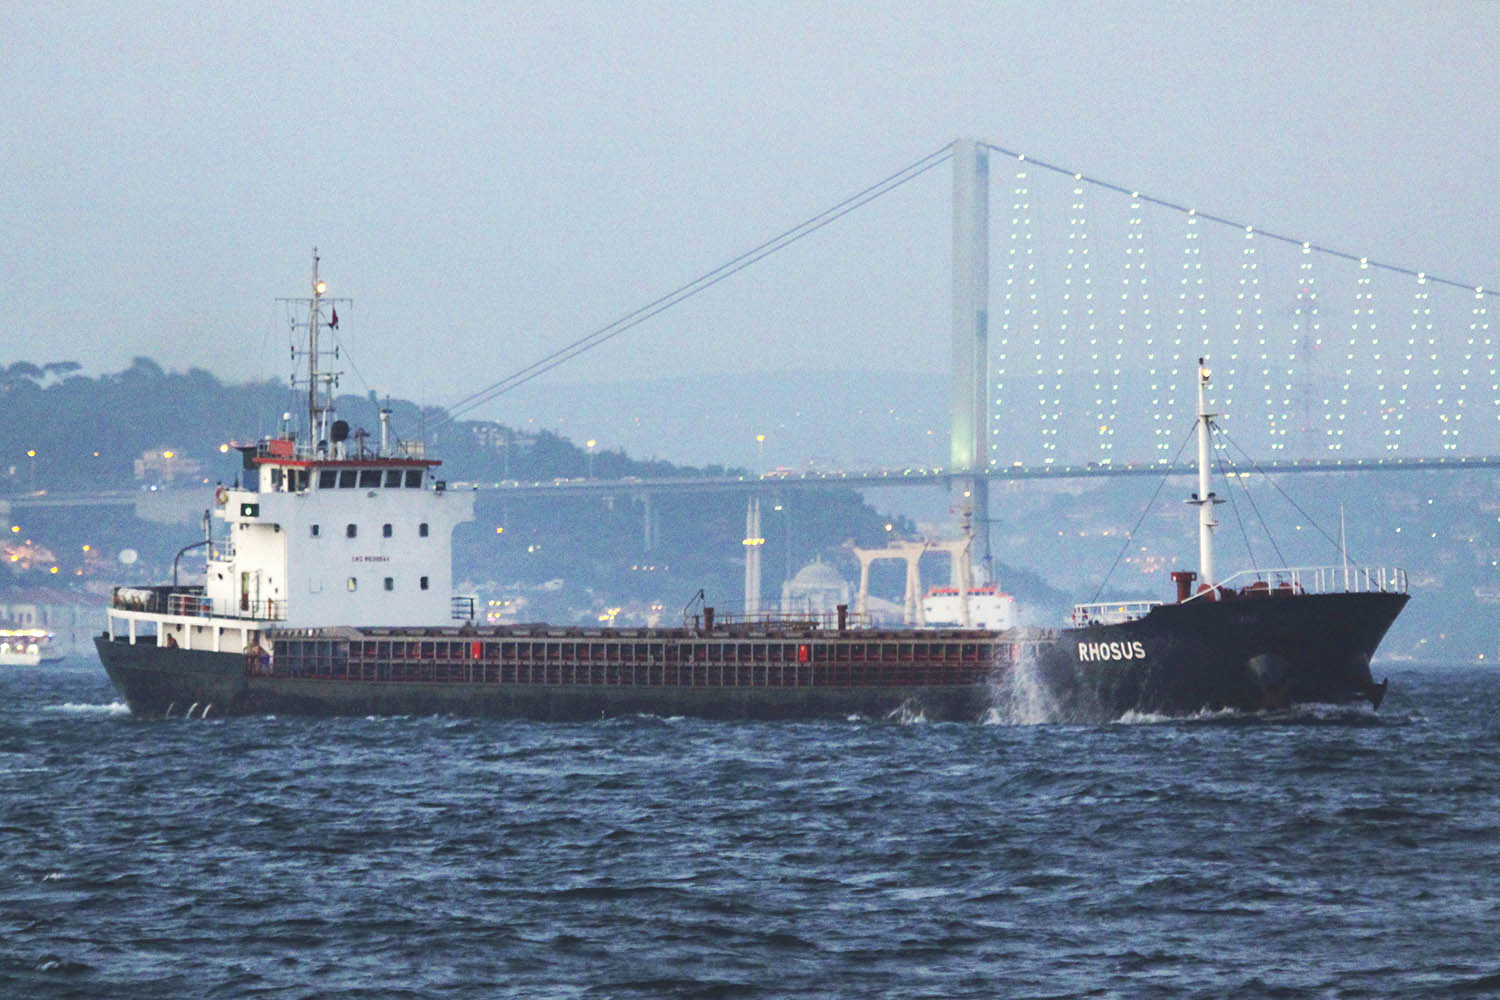 FILED - 14 August 2010, Turkey, Istanbul: The freighter Rhosus sets course for the Mediterranean off Istanbul. After the heavy explosion in the port of Beirut with more than 130 dead, the former owner of a freighter does not feel responsible. His Moldovan-flagged ship "Rhosus" is said to have brought large quantities of ammonium nitrate to Lebanon, which is thought to be responsible for the explosion at the port. (to dpa "Explosion in Beirut: ex-ship owner denies joint responsibility") Photo by: Hasenpusch/picture-alliance/dpa/AP Images